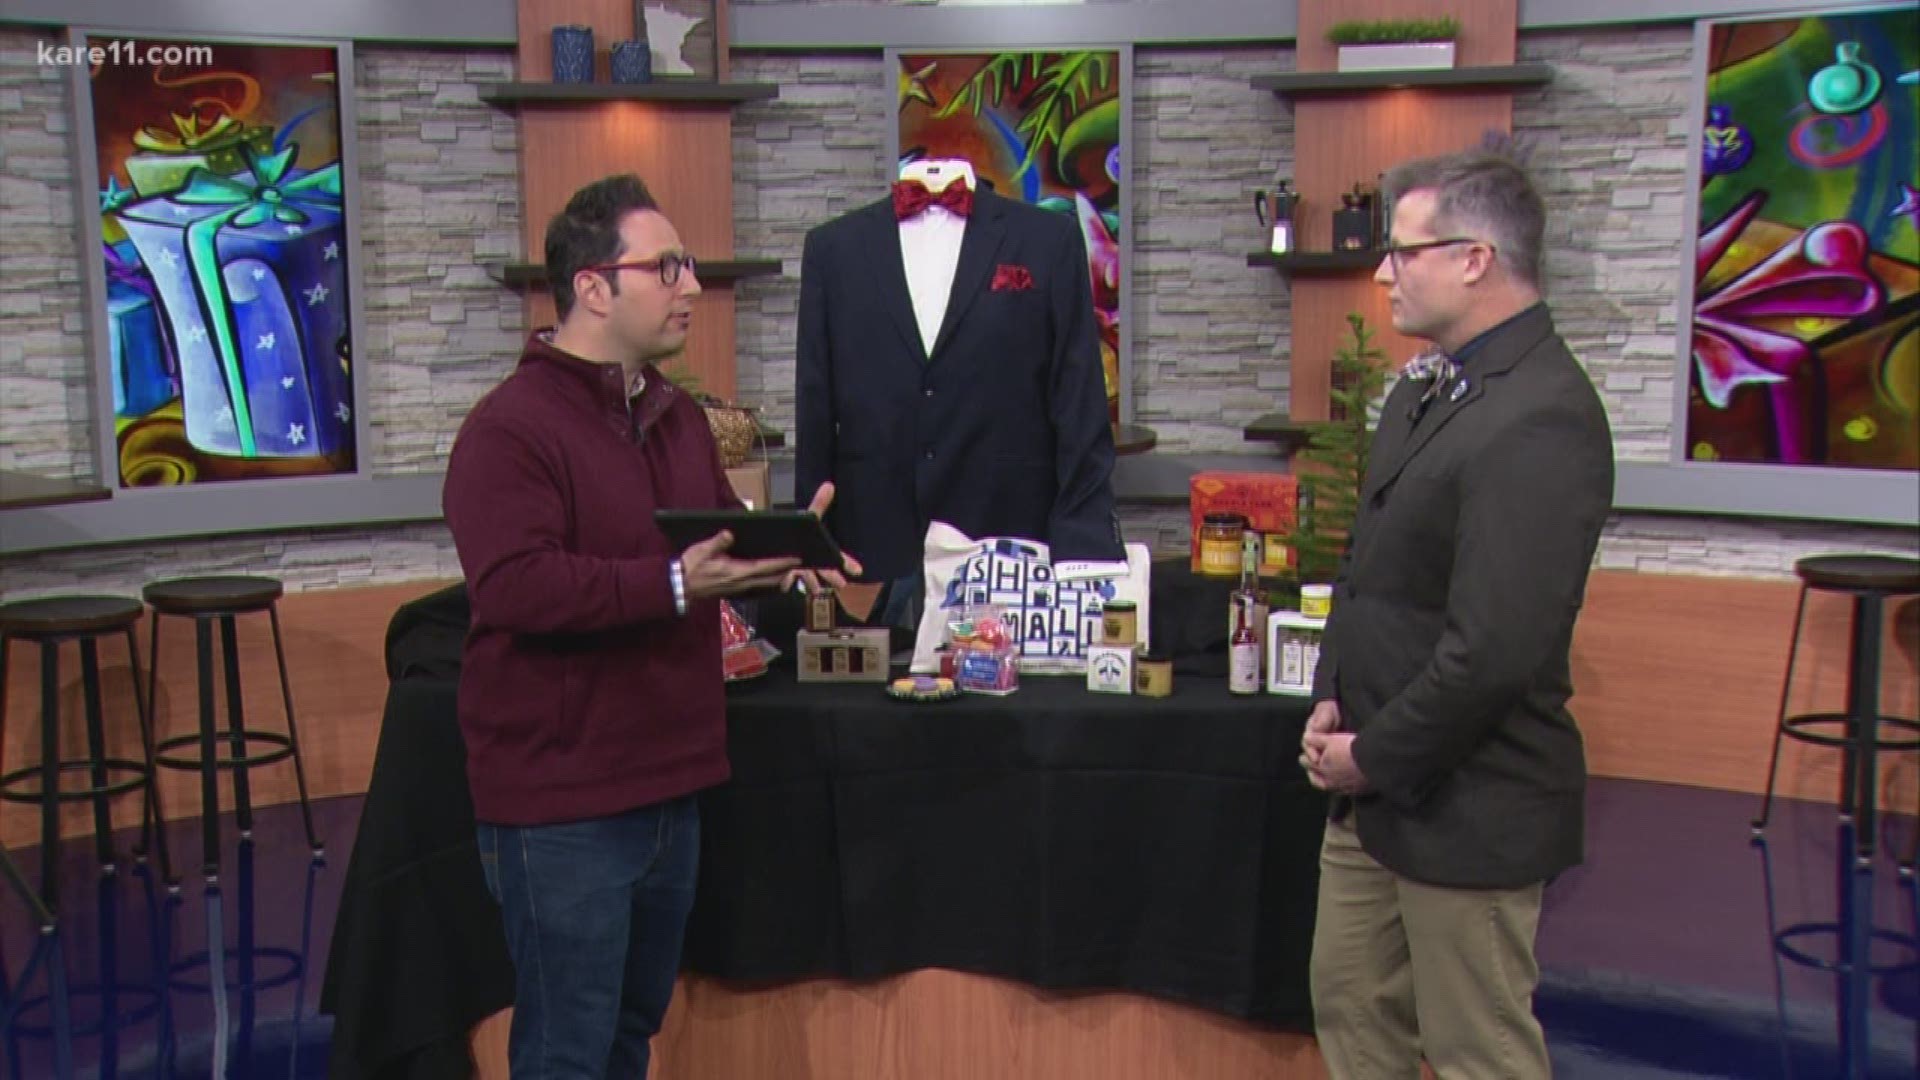 Midwest Pantry co-founder Chad Gillard gave a preview of the local goods his shop has to offer on KARE 11 Saturday.  https://www.kare11.com/article/news/local/kare11-saturday/shop-small-and-buy-local-this-holiday/89-616702735